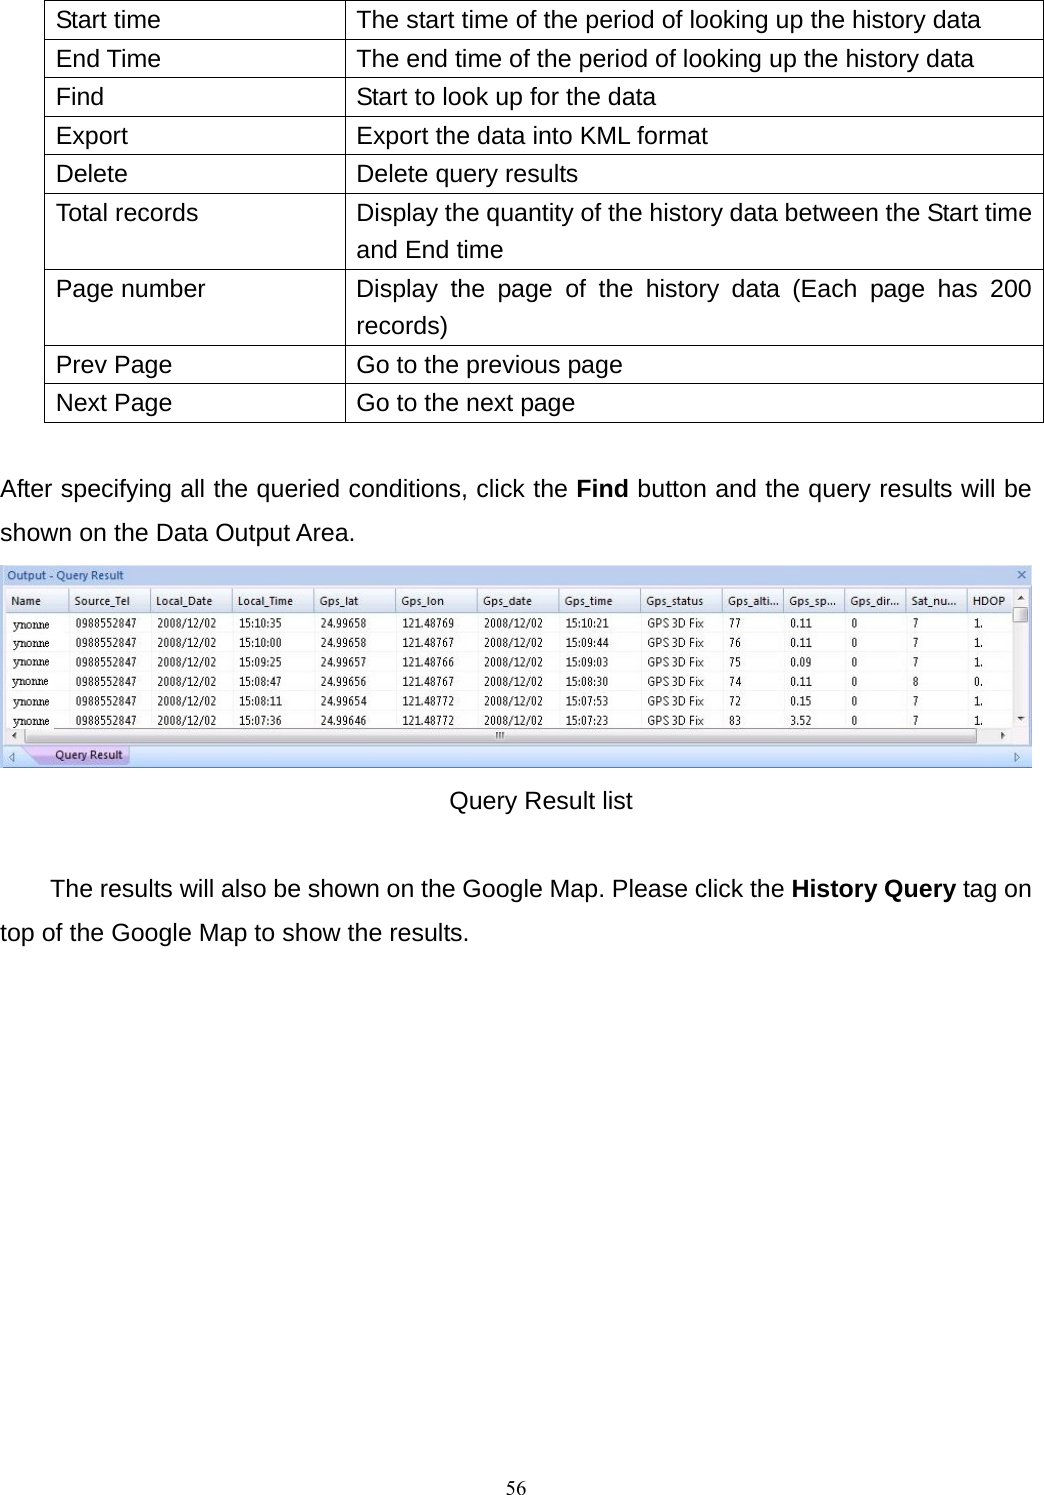 Start time  The start time of the period of looking up the history data End Time  The end time of the period of looking up the history data Find  Start to look up for the data Export  Export the data into KML format Delete  Delete query results Total records  Display the quantity of the history data between the Start time and End time Page number   Display the page of the history data (Each page has 200 records) Prev Page  Go to the previous page Next Page  Go to the next page  After specifying all the queried conditions, click the Find button and the query results will be shown on the Data Output Area.  Query Result list  The results will also be shown on the Google Map. Please click the History Query tag on top of the Google Map to show the results.  56